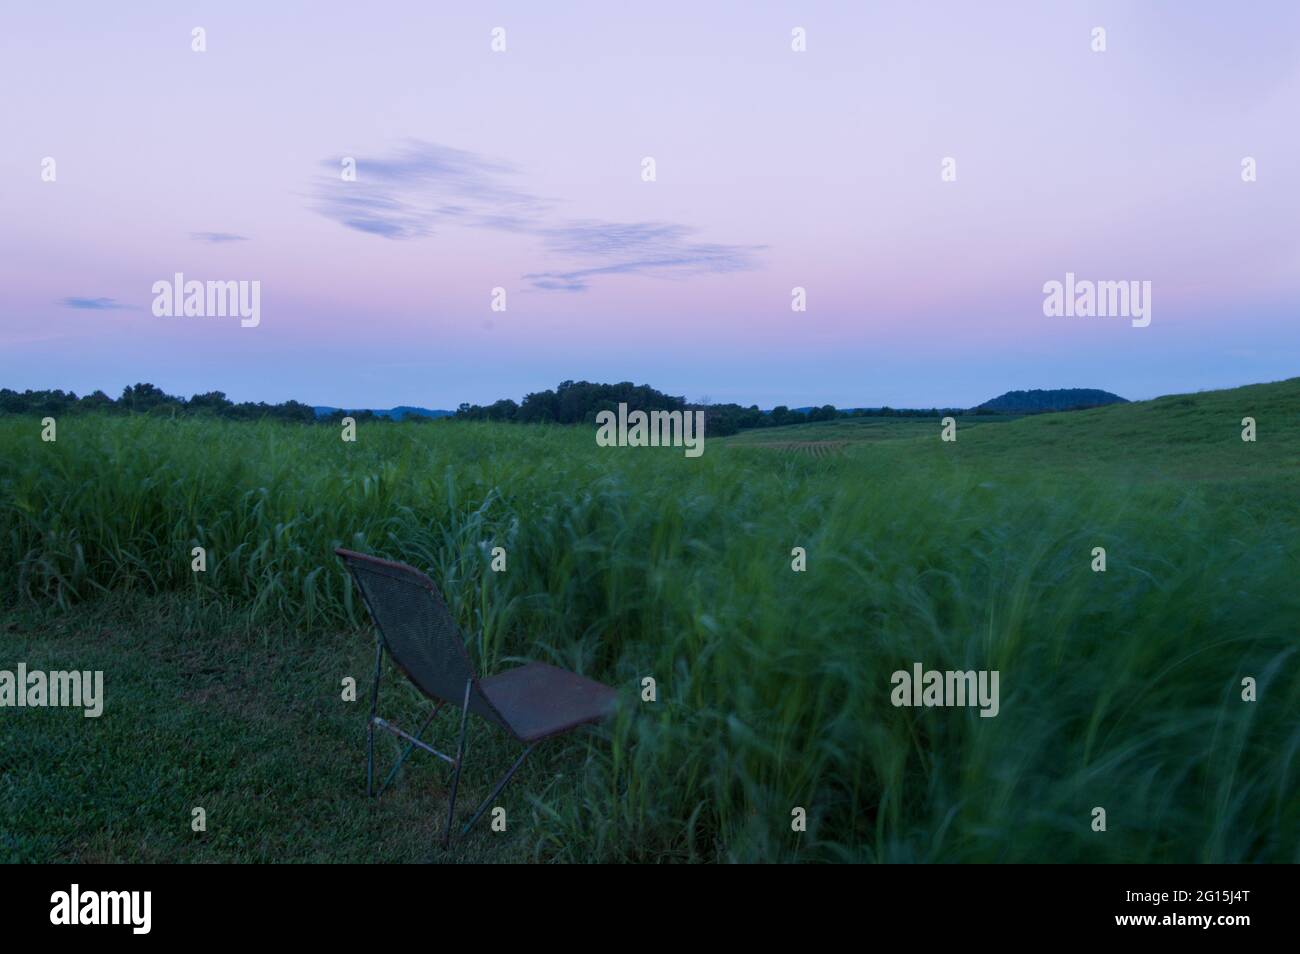 Abbey of Gethsemani, near Bardstown, Kentucky, chair sitting at the edge of a grassy field, sunrise, place of quiet and meditation Stock Photo